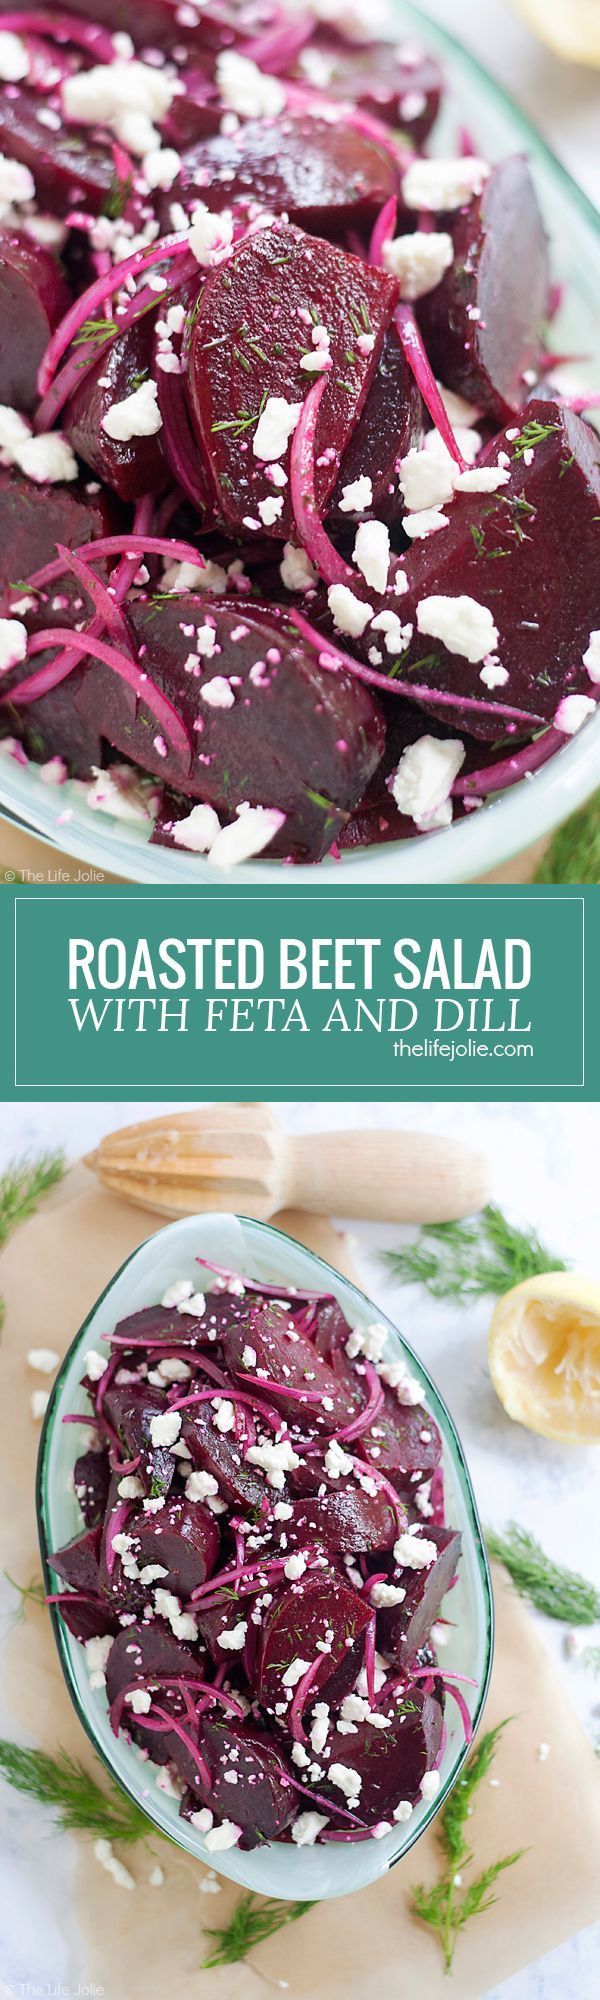 Try this Roasted Beet Salad with Feta and Dill: it’s an easy side dish recipe and is a great alternative to the usual holiday